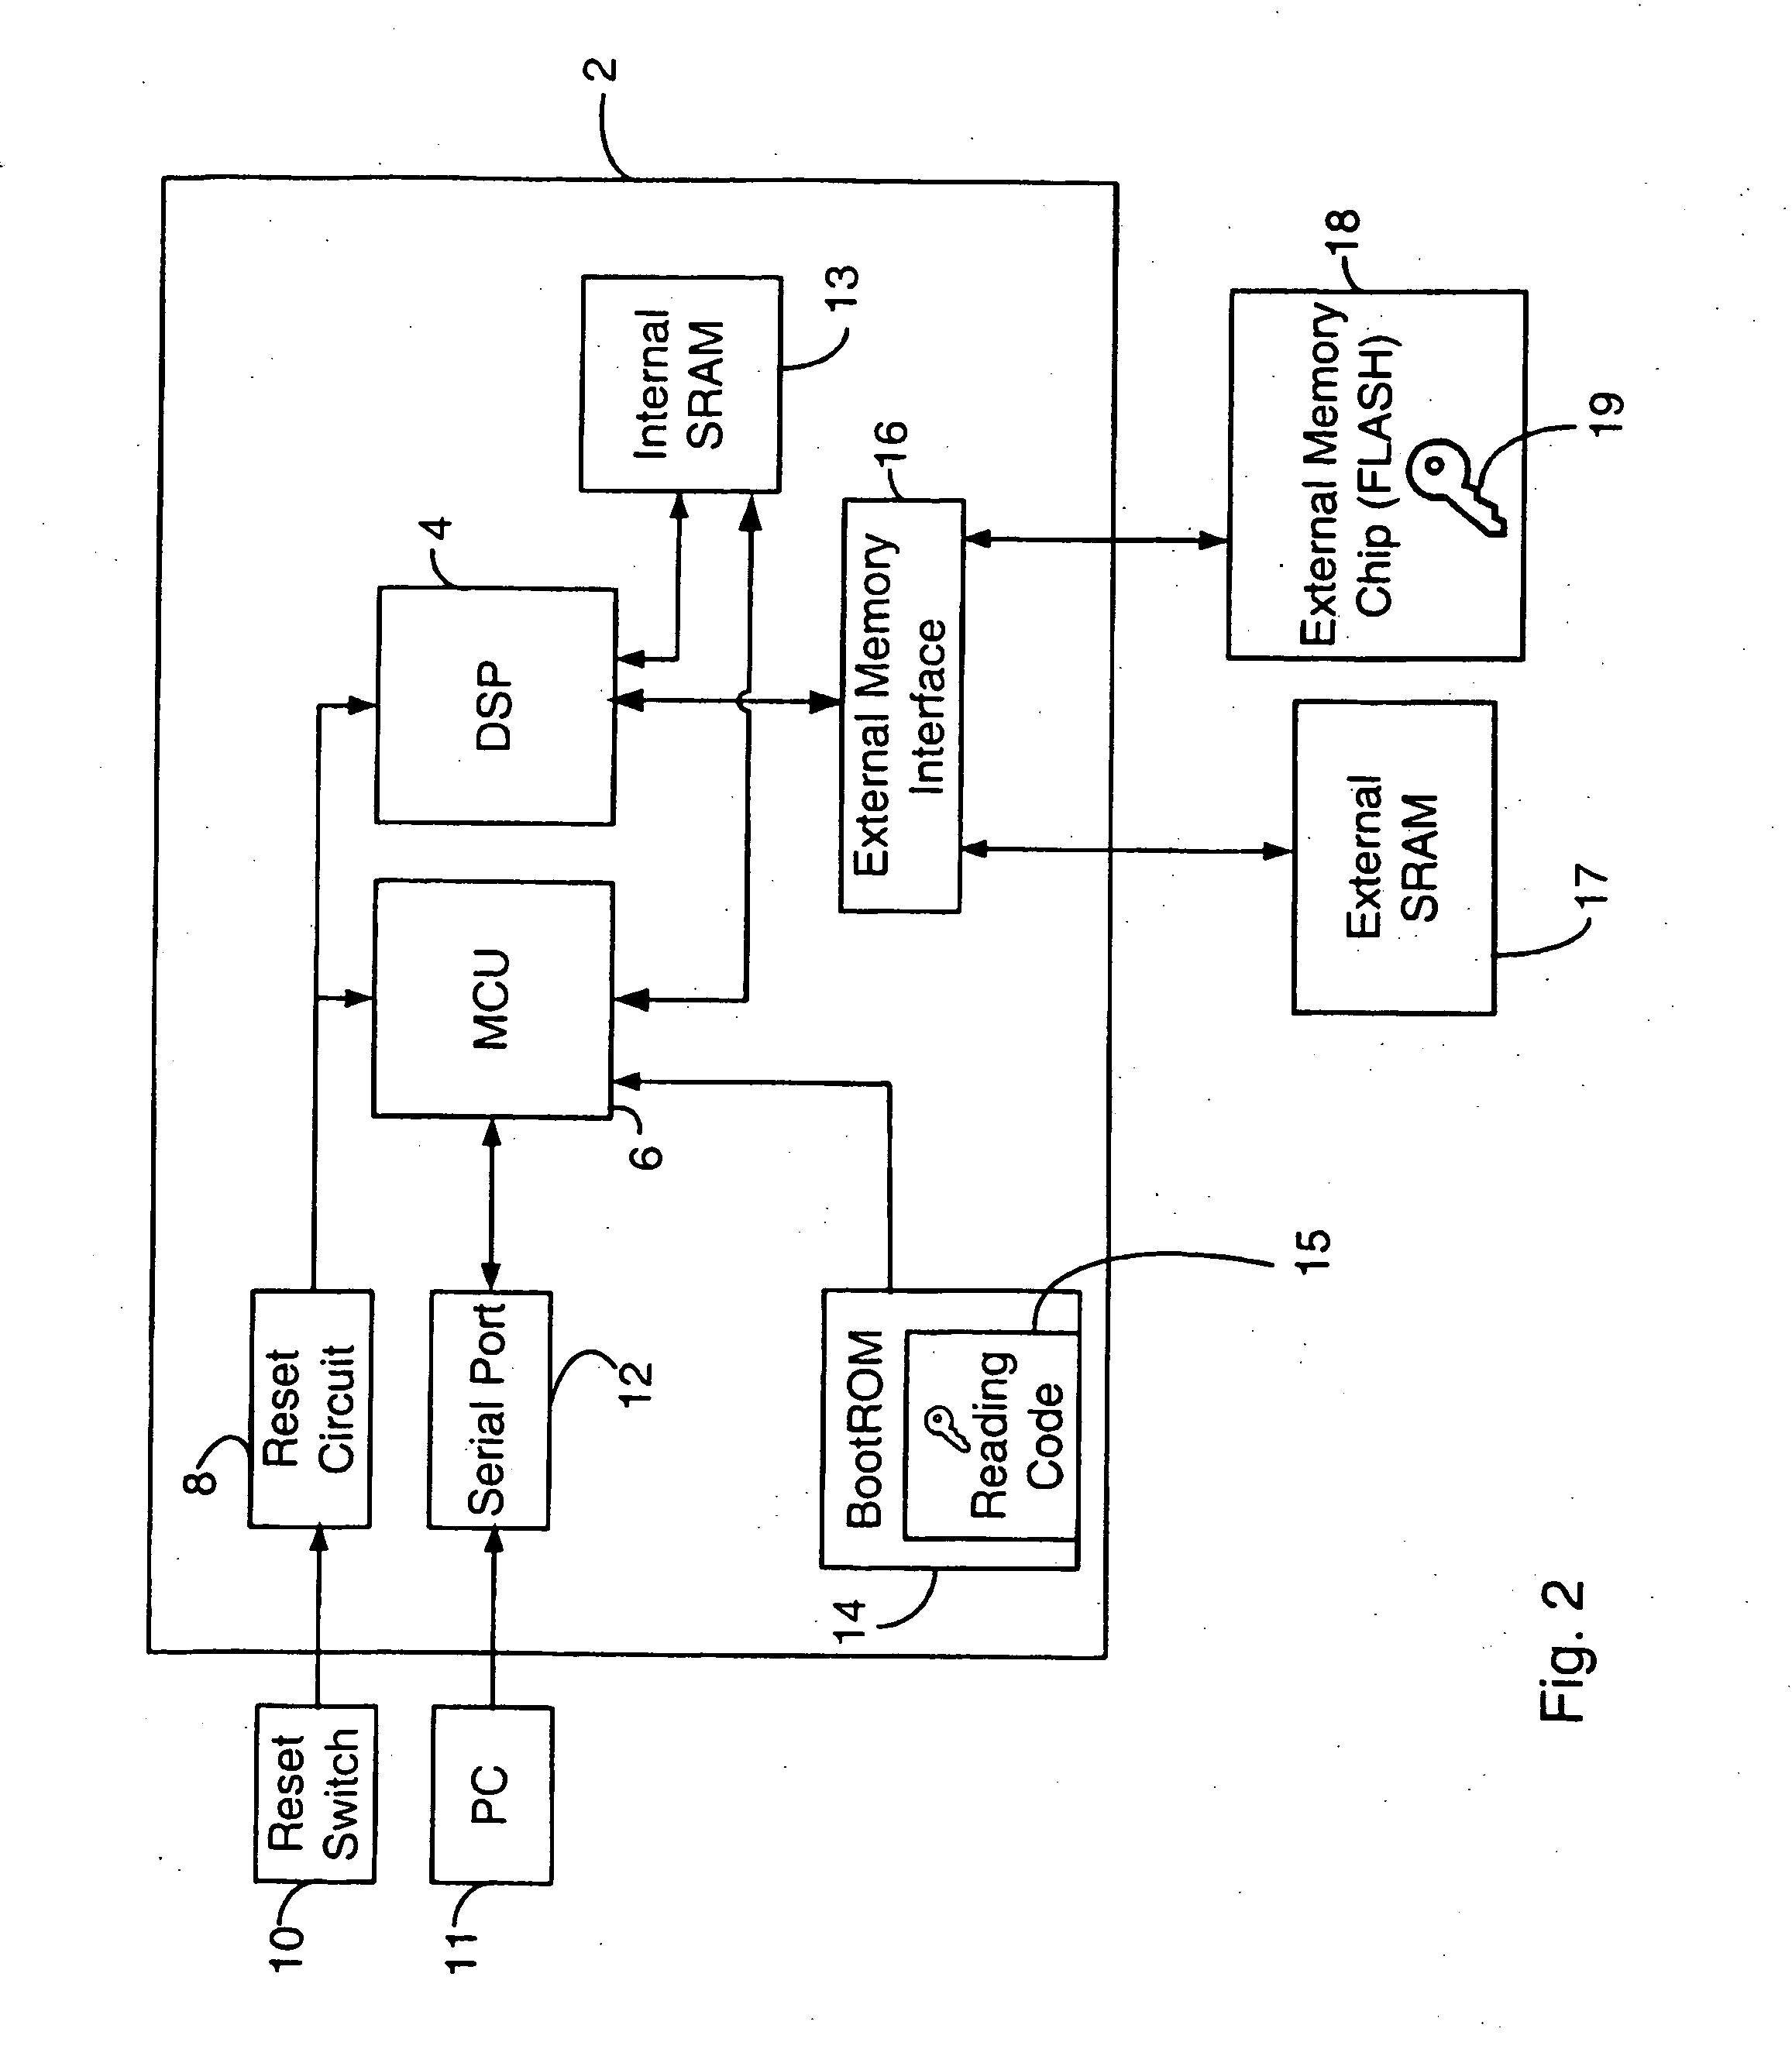 On-chip security method and apparatus